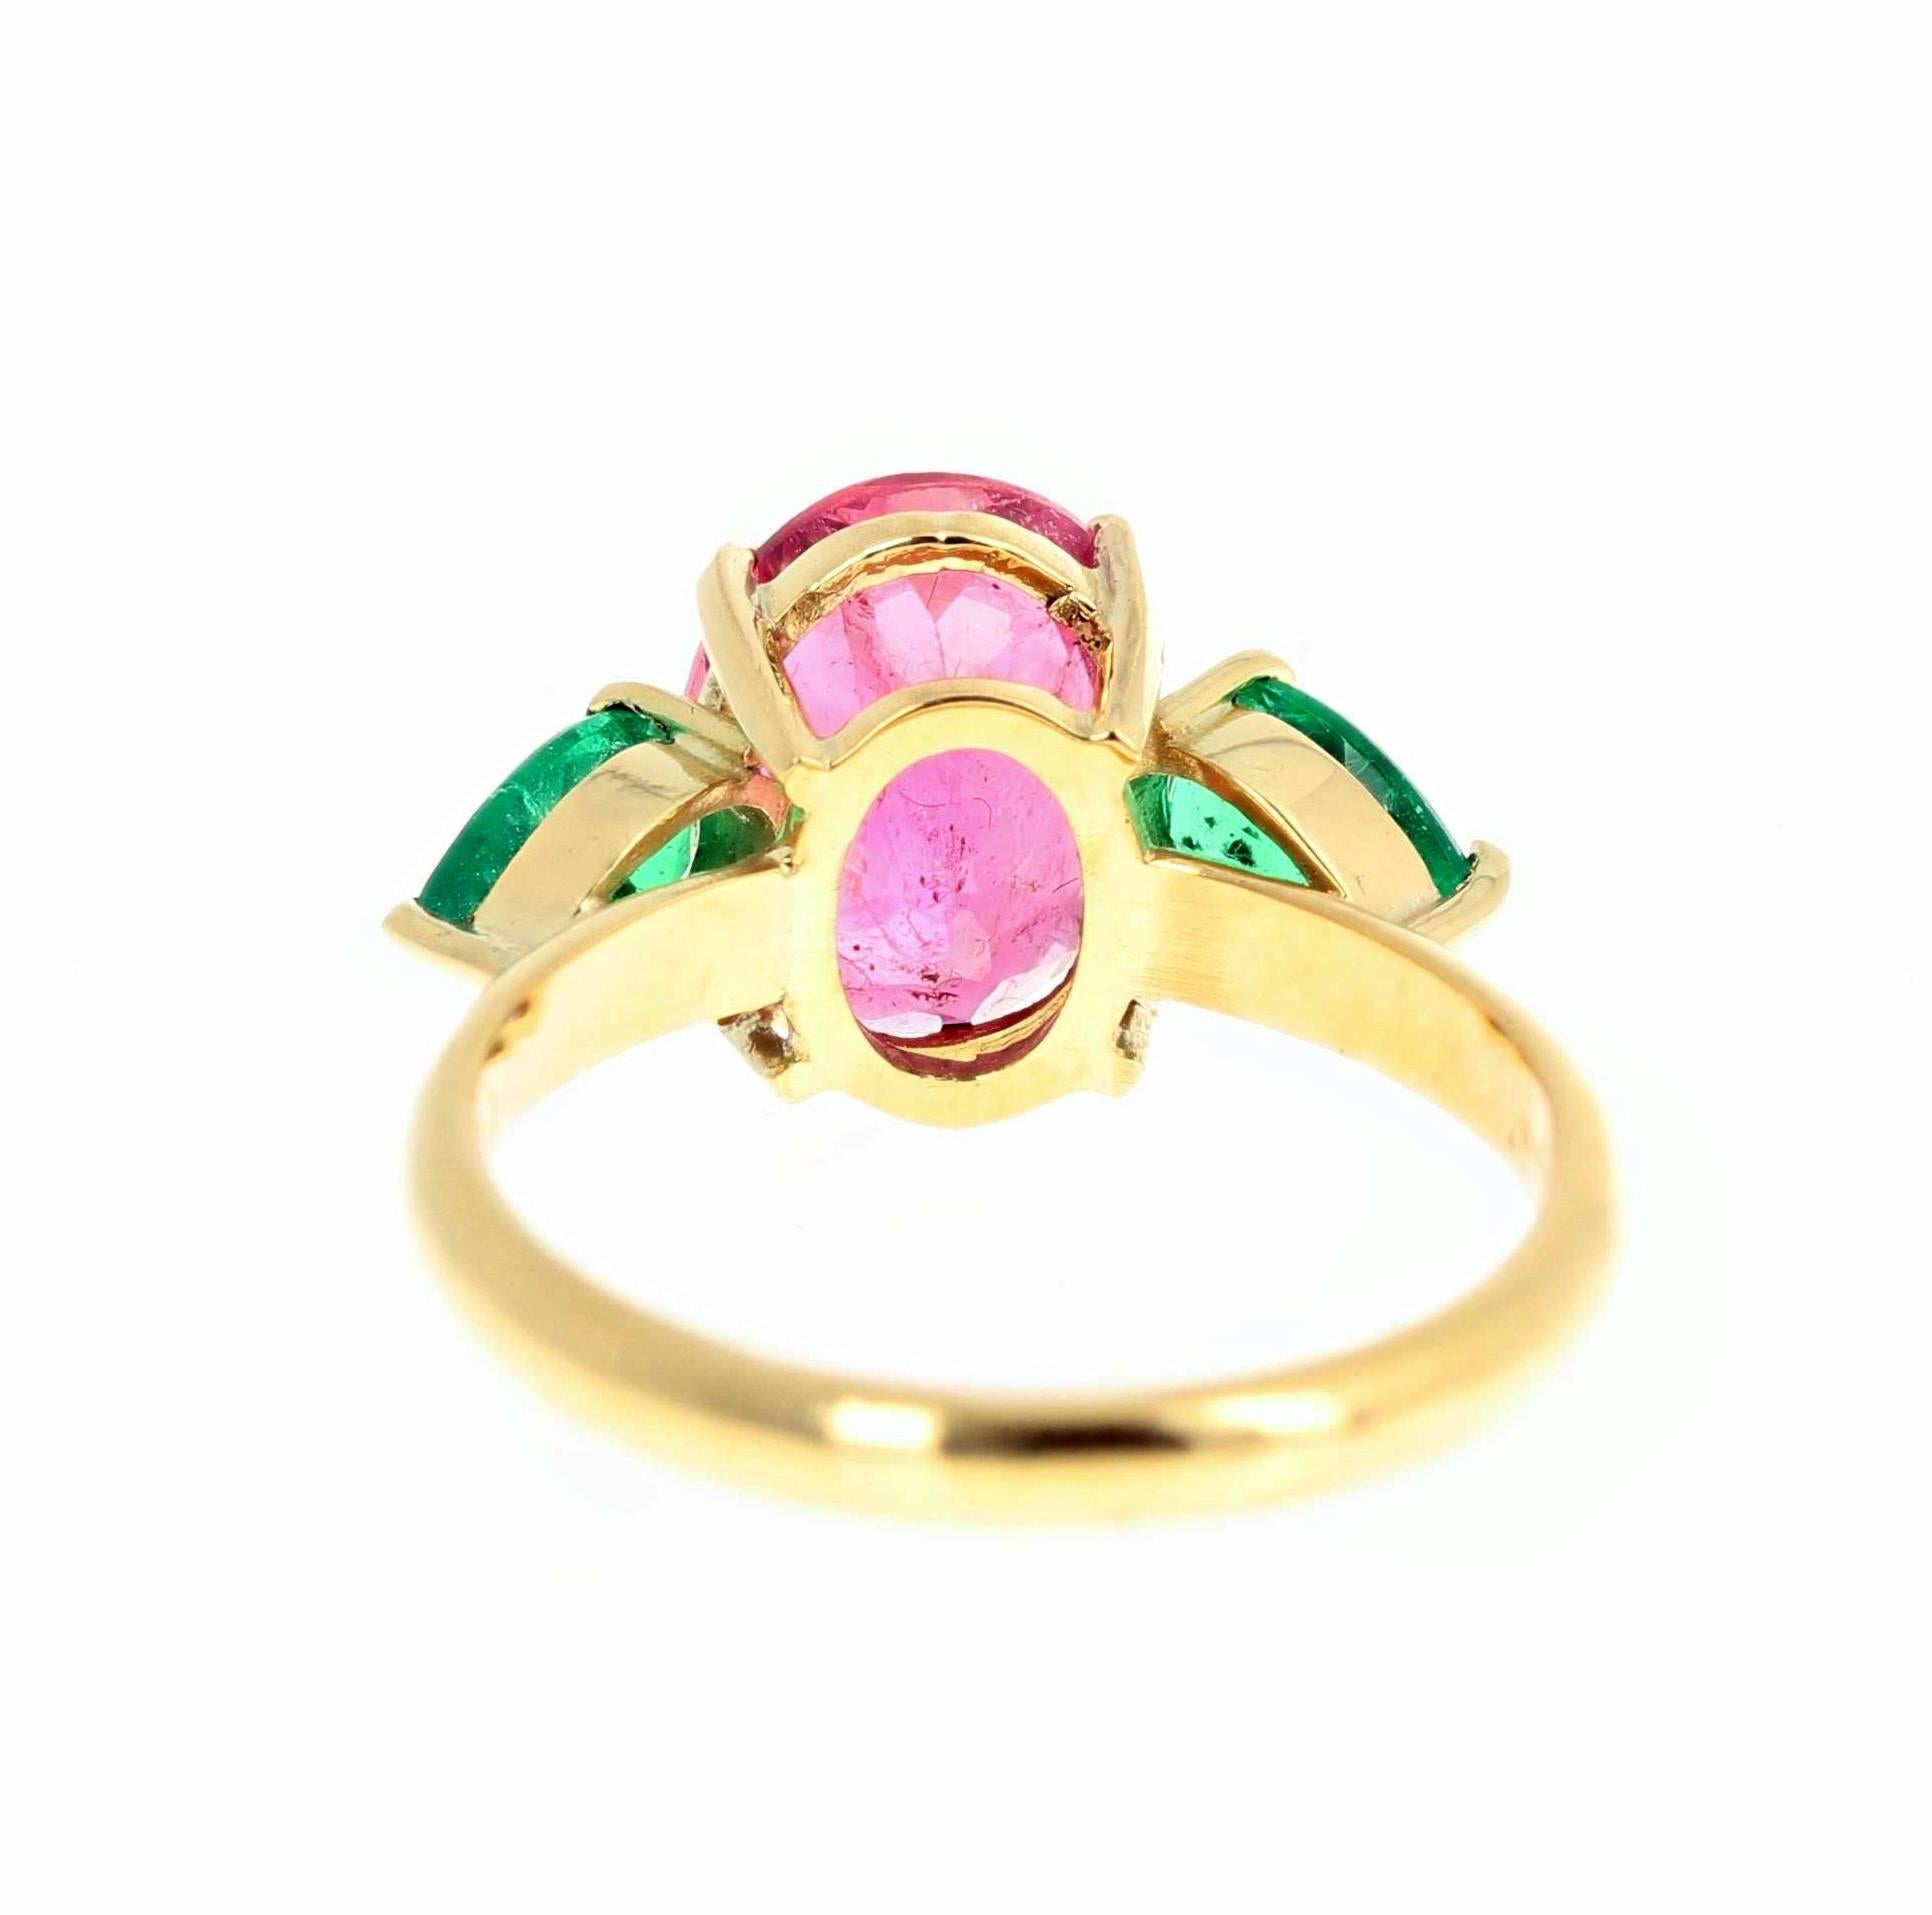 AJD Elegant Glittering 2.7 Carat Tourmaline & Emerald 18 Kt Yellow Gold Ring In New Condition For Sale In Raleigh, NC